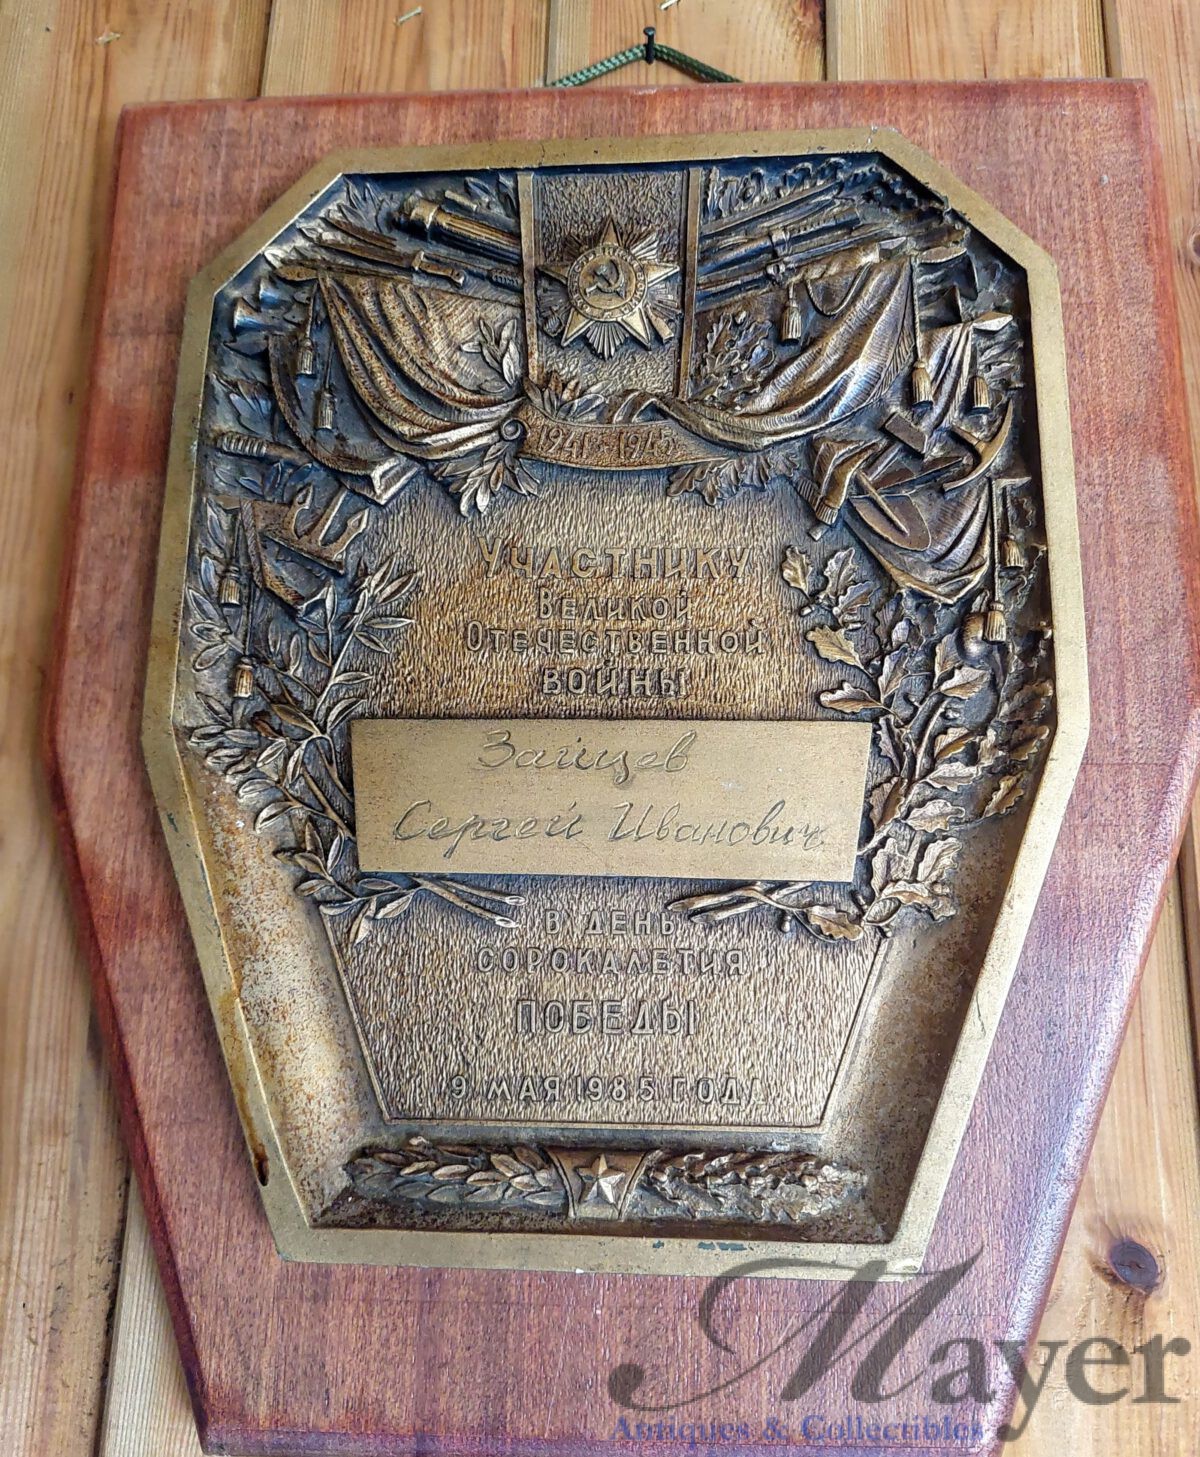 Soviet Russian WW2 plaque 40th anniversary for participation in the great patriotic war.